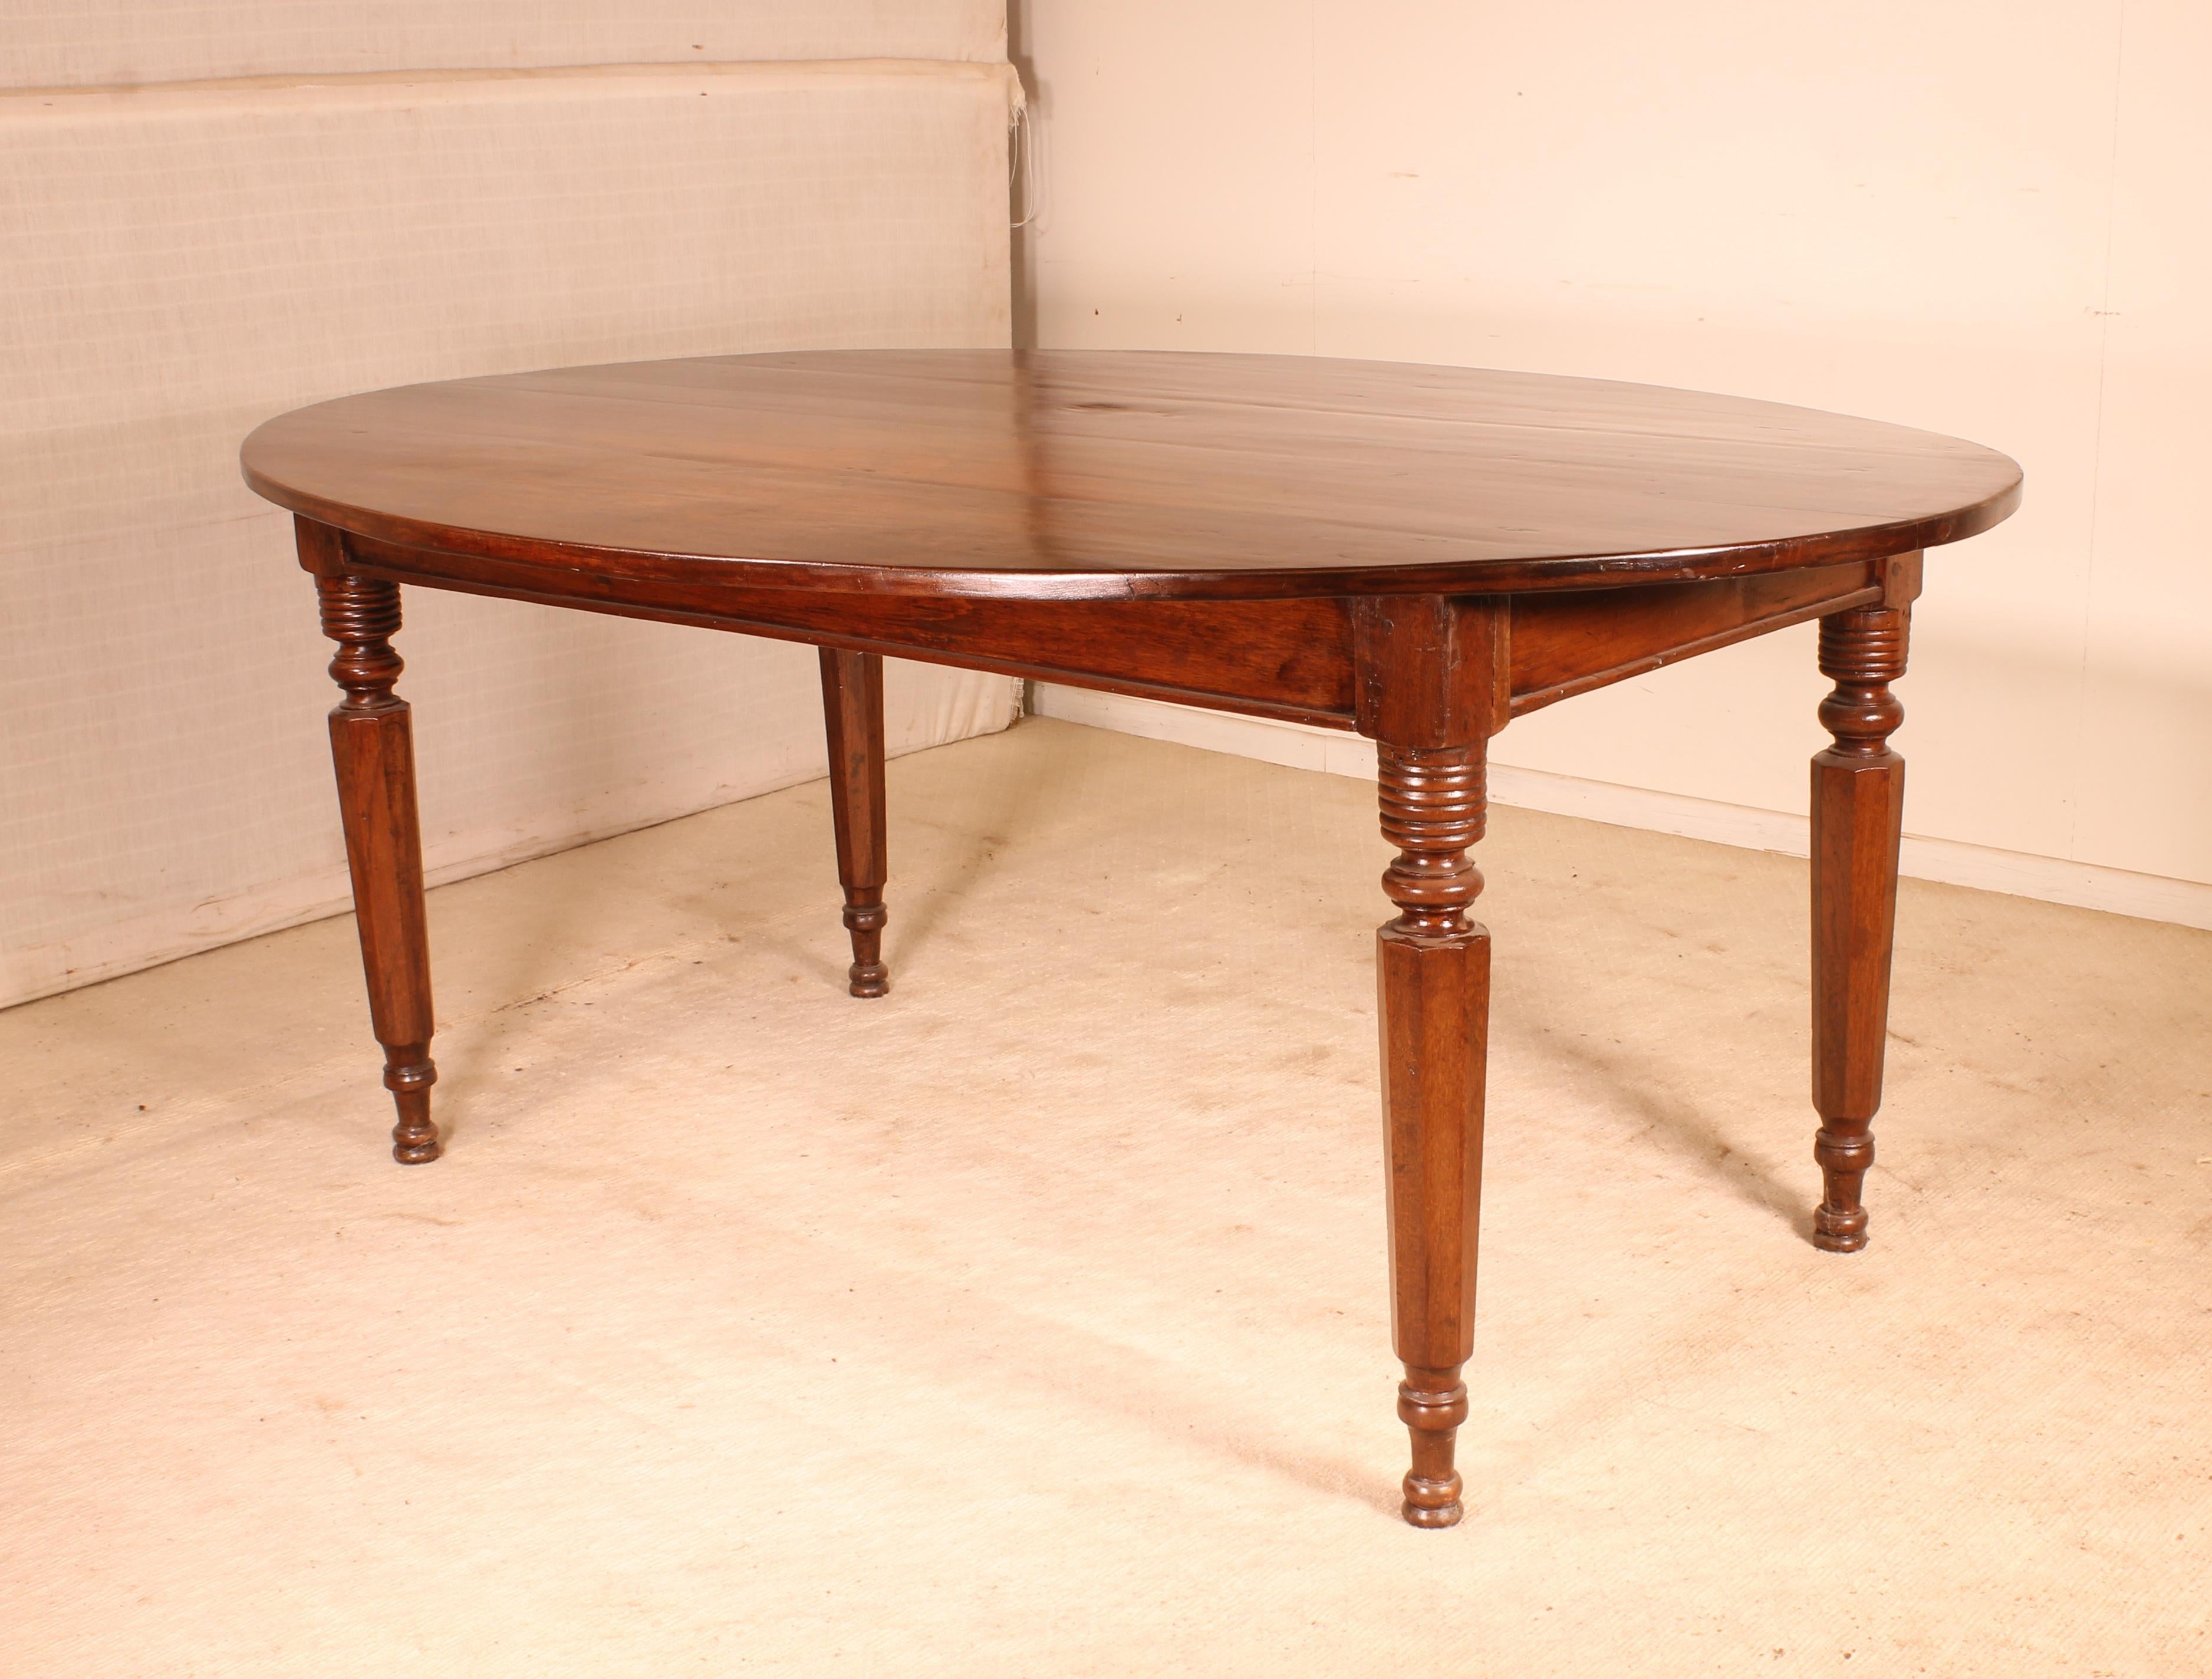 Dutch Refectory Table Ellipse Shaped, 19th Century